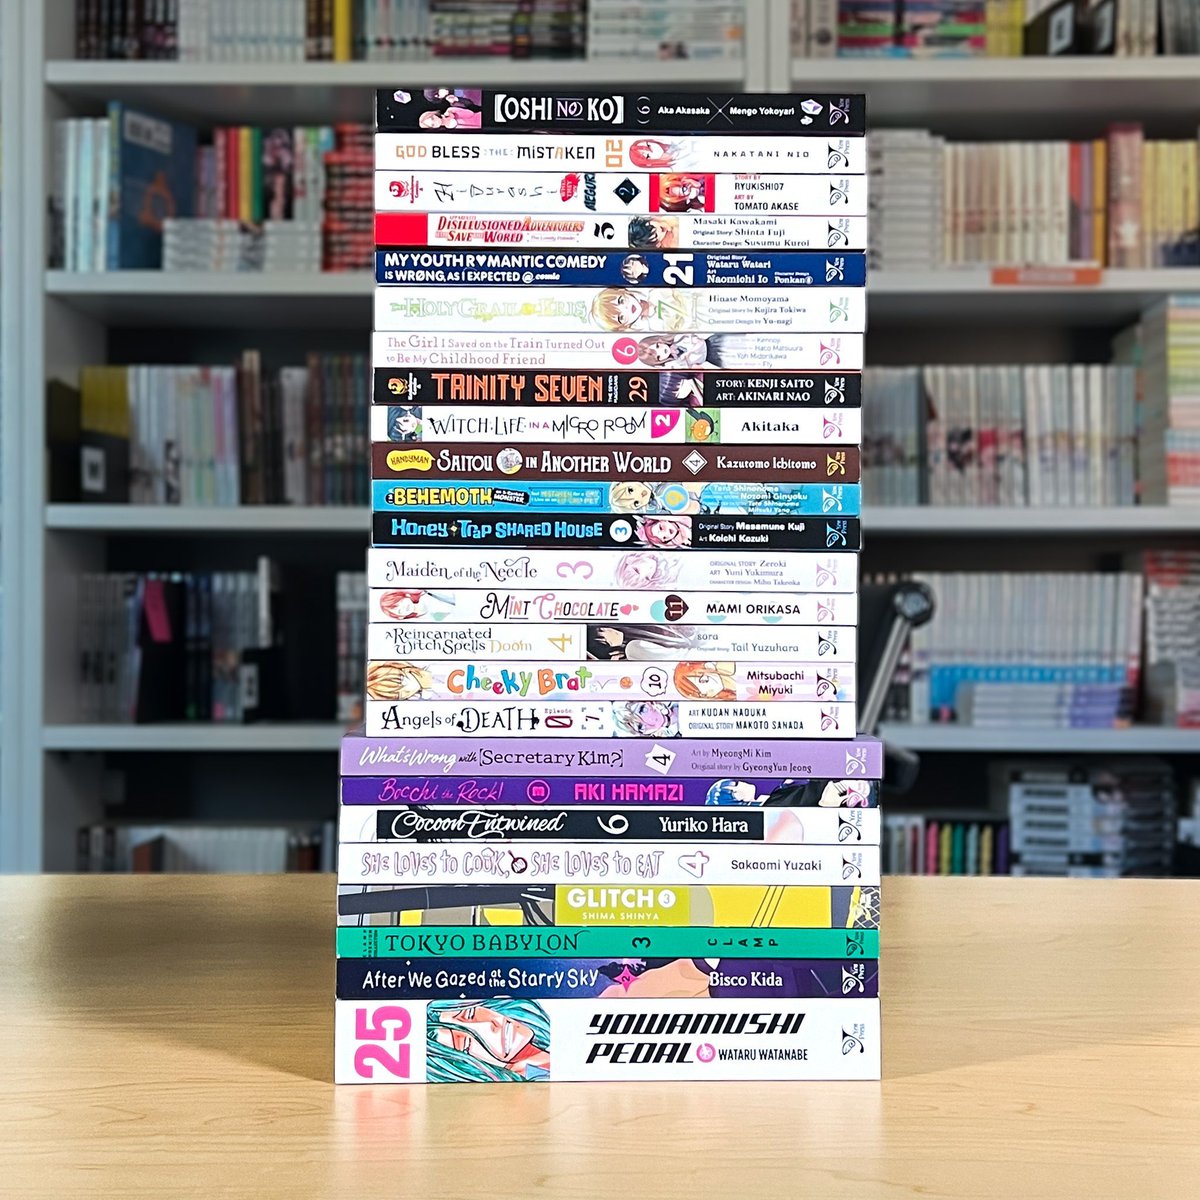 We know, we know, you're here for the manga...and today we're delivering a FAT 👏 STACK 👏!!!

Look for all these volumes on the shelves of your local book store to keep those TBR stacks going! 📚 📚 📚

📅: buff.ly/3H7DSz5